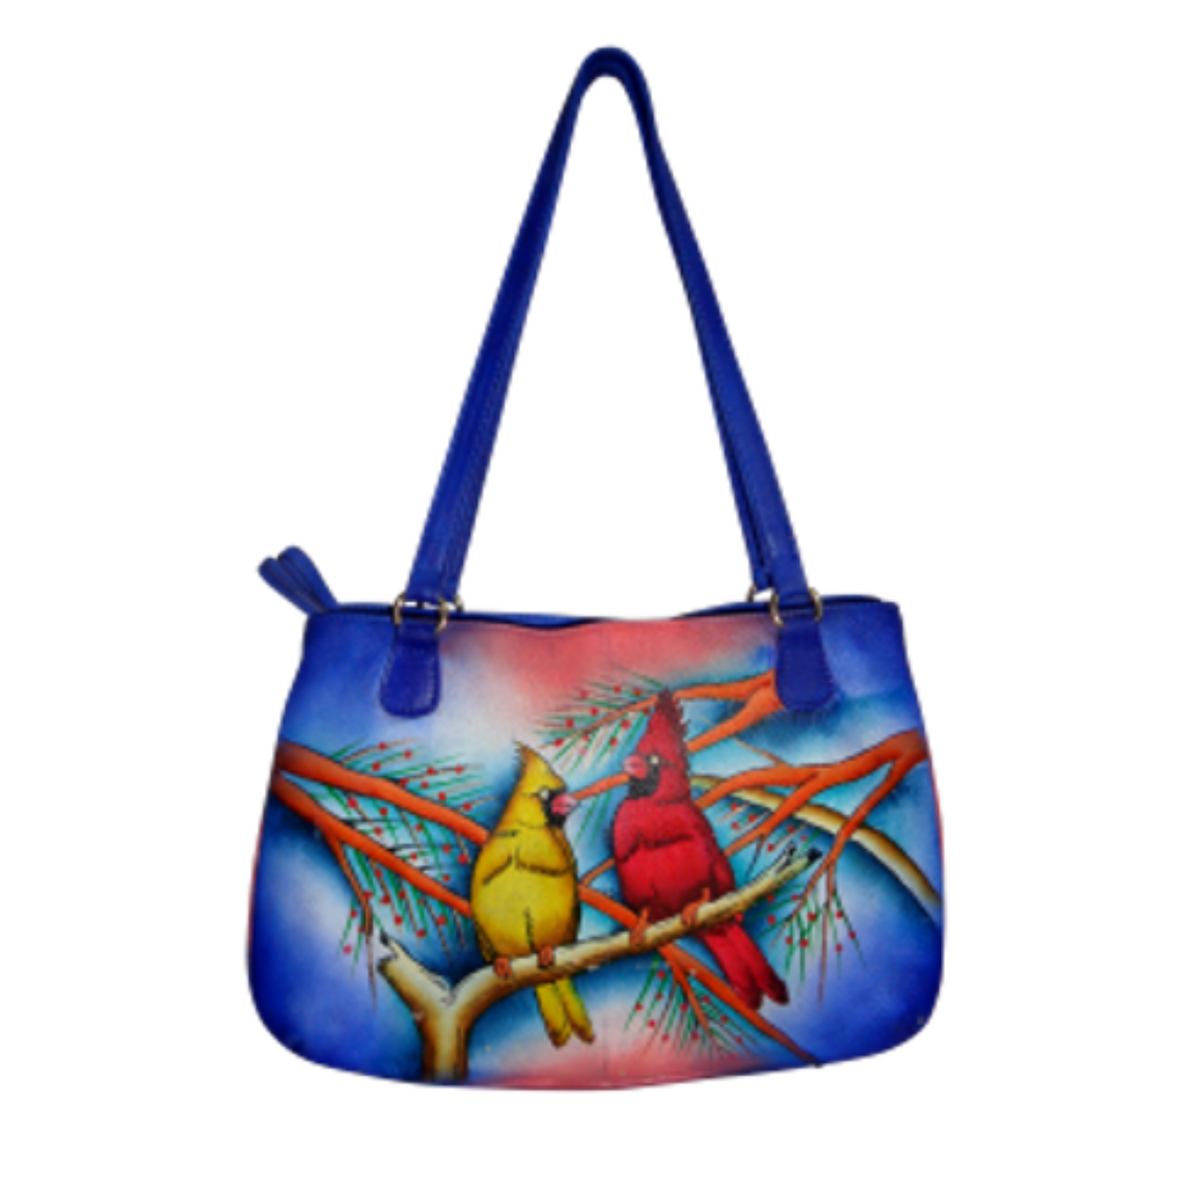  Evi's Bags Women's Hand Painted Genuine Leather